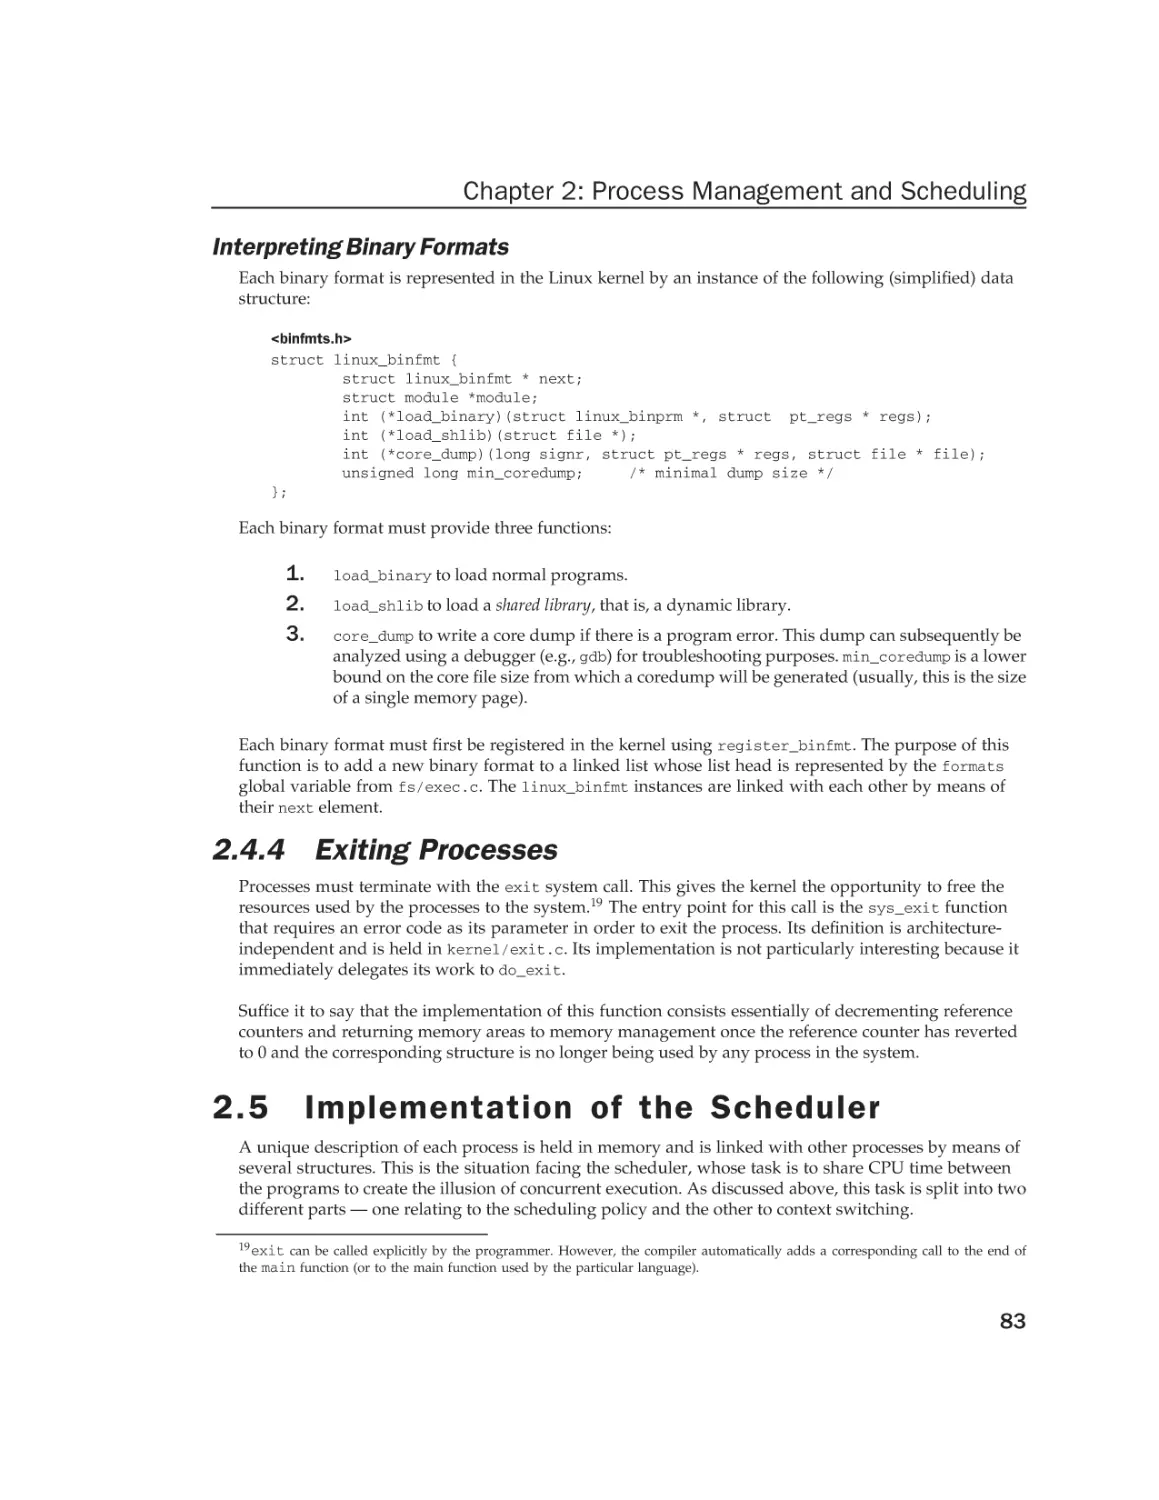 2.5 Implementation of the Scheduler